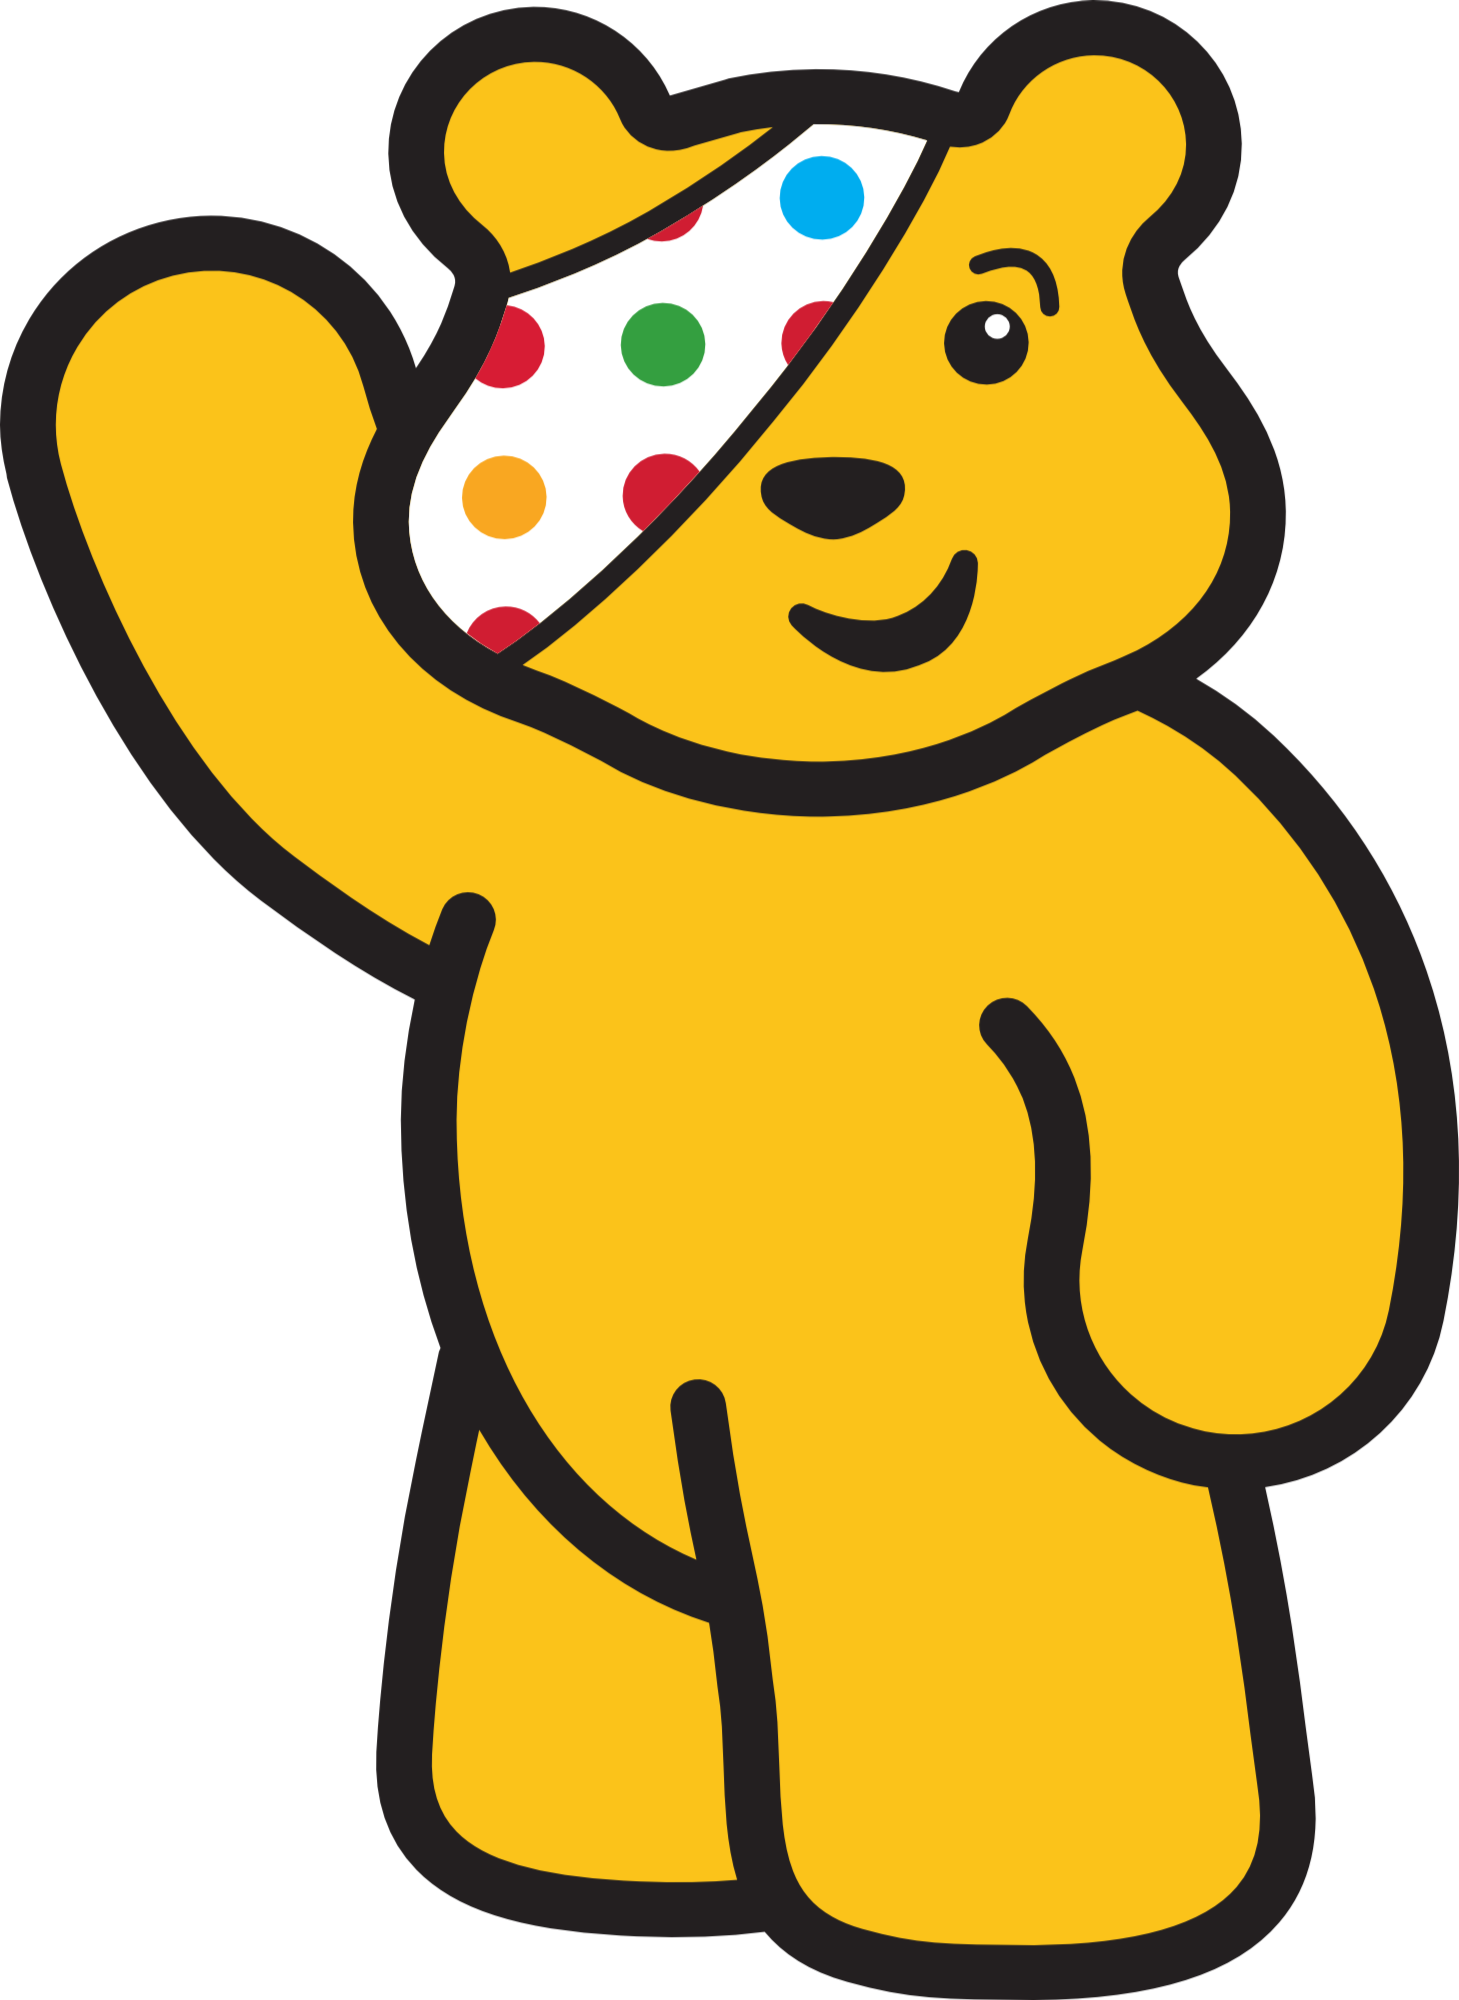 Free Clipart Pudsey Bear - Pudsey Bear (1459x2000)